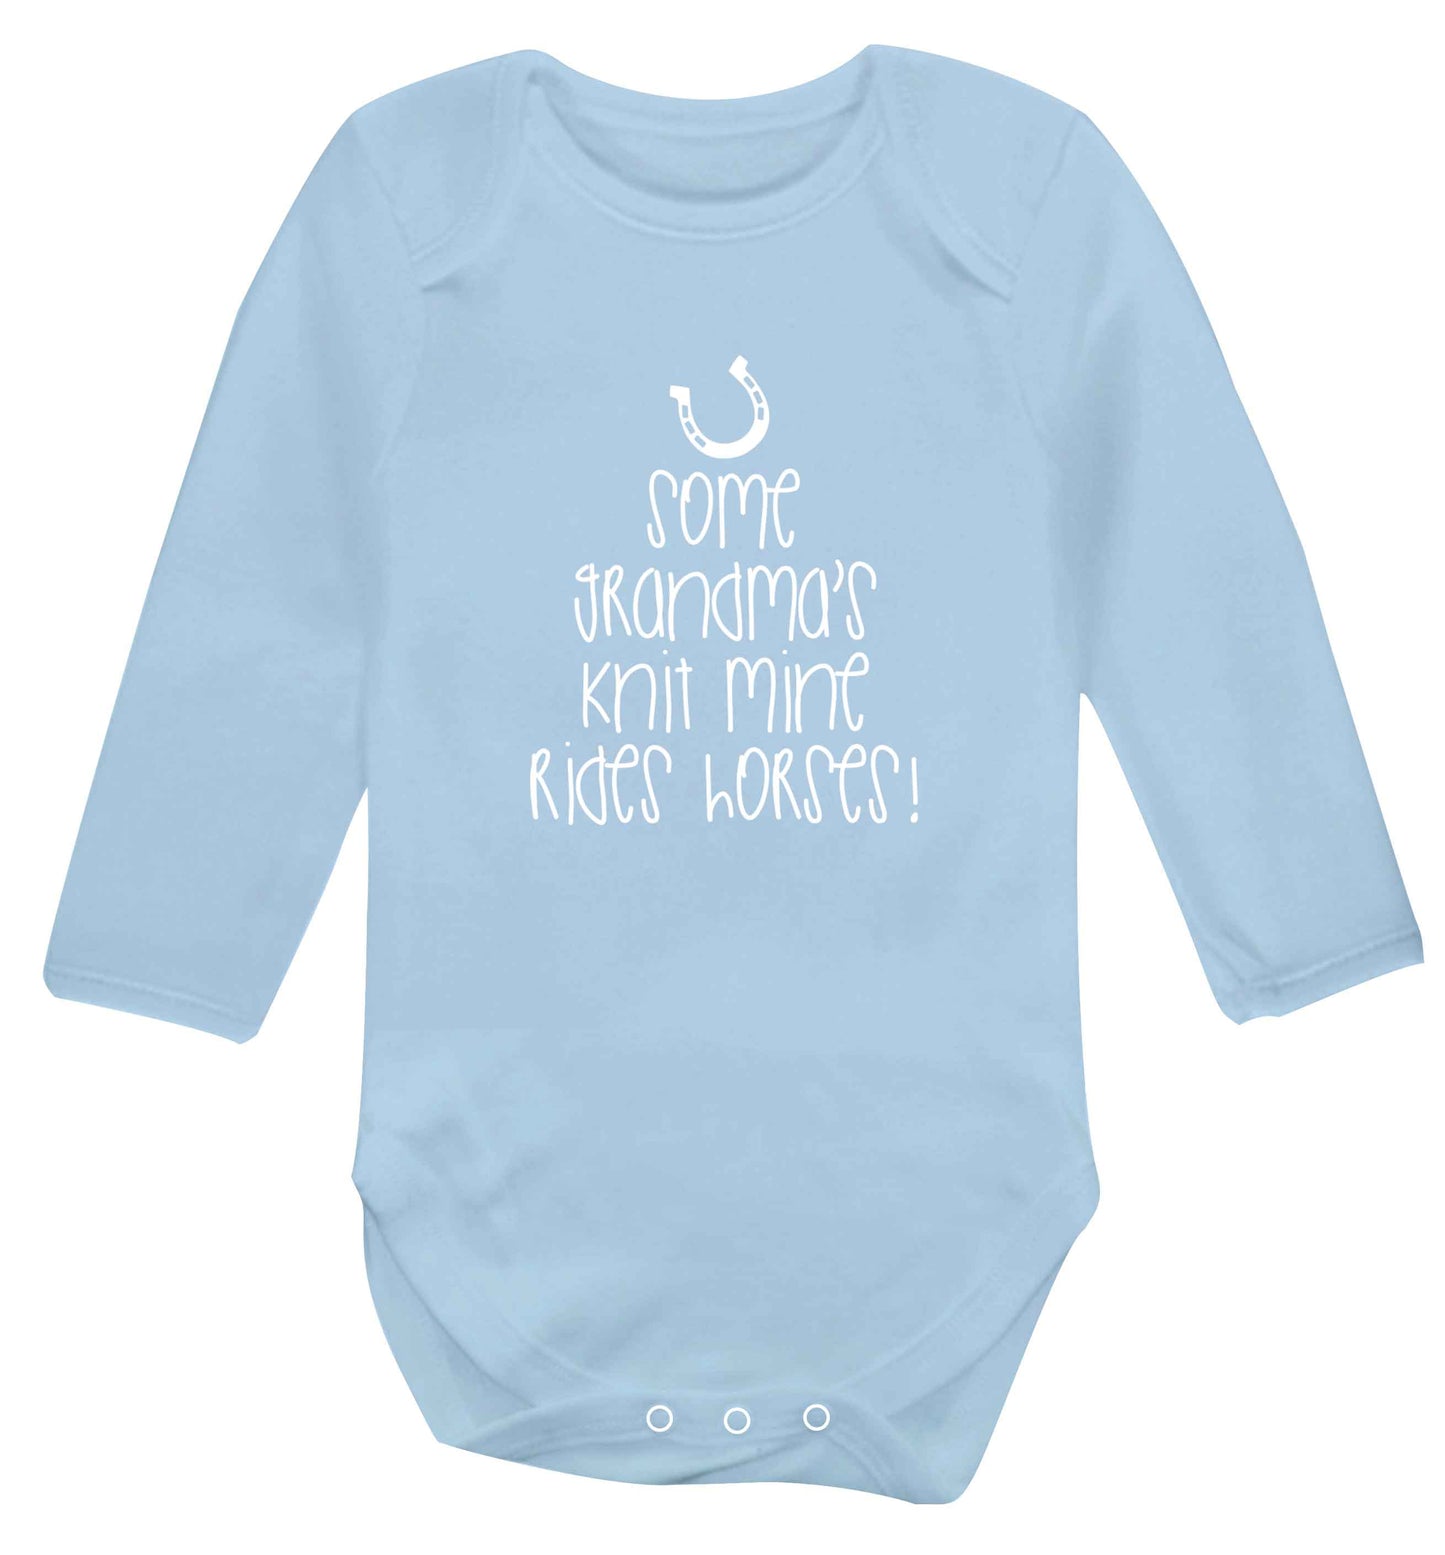 Some grandma's knit mine rides horses baby vest long sleeved pale blue 6-12 months